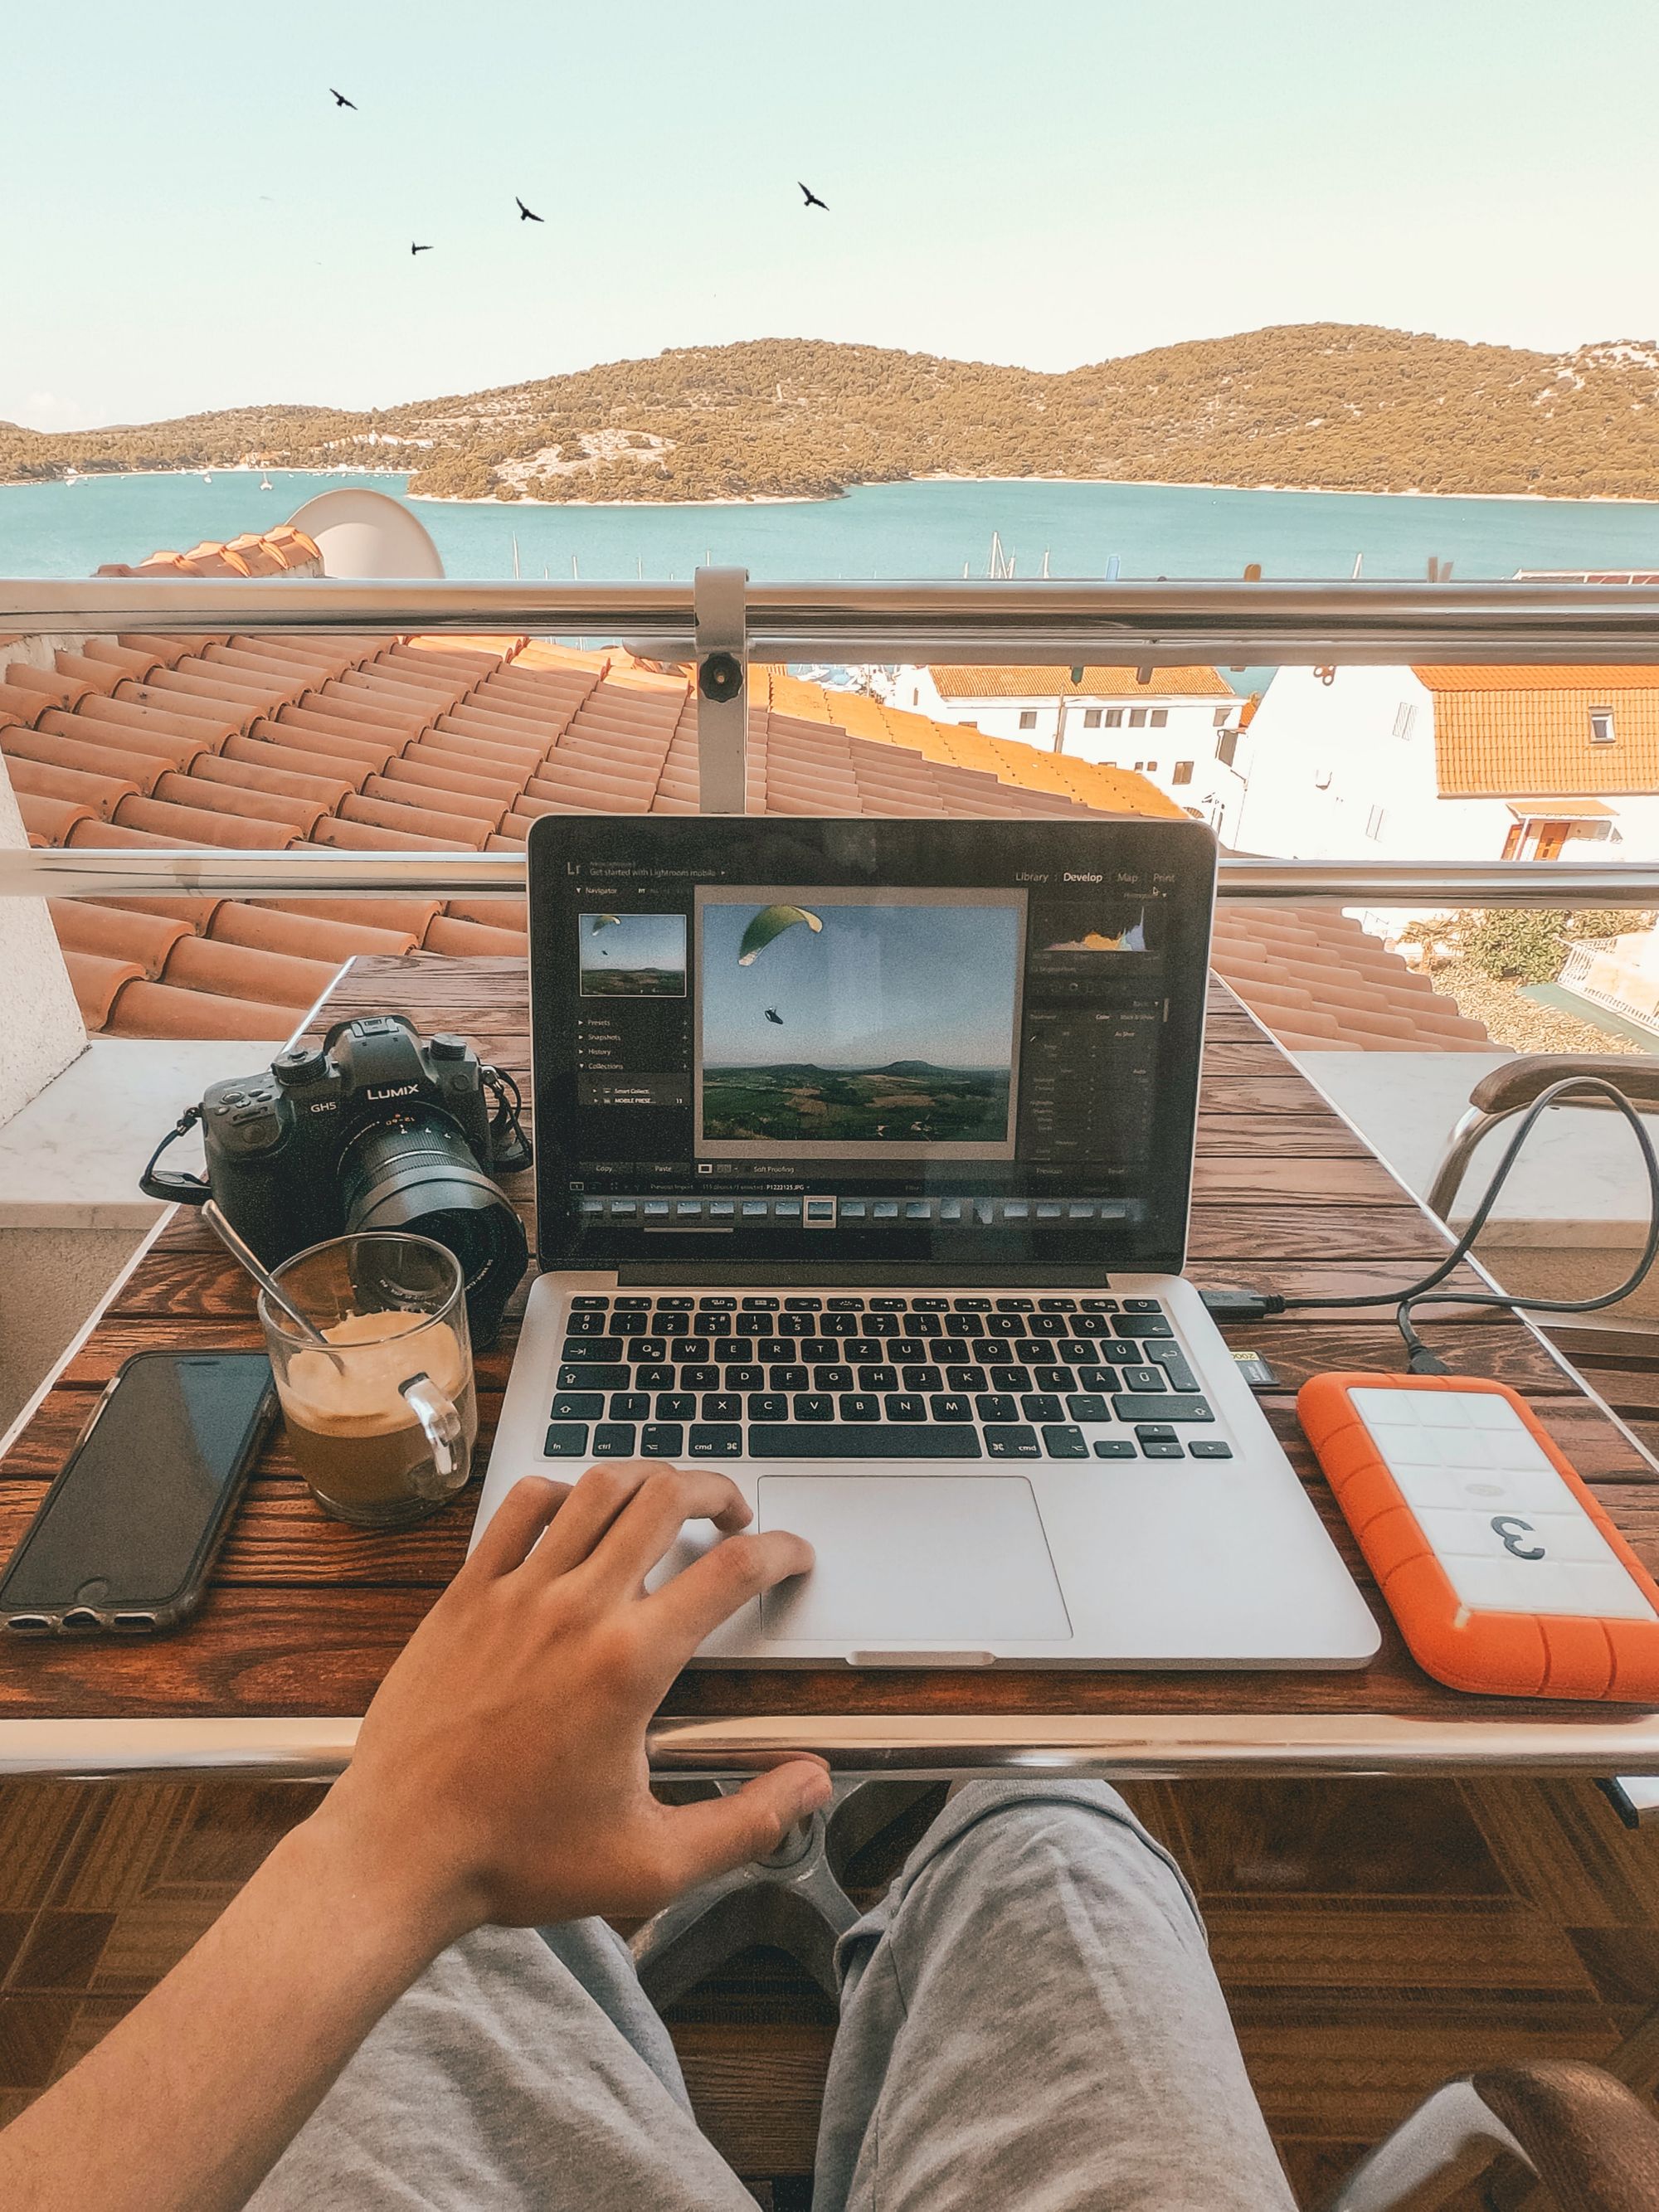 Remote Work – How to Find Remote Working Jobs from Home